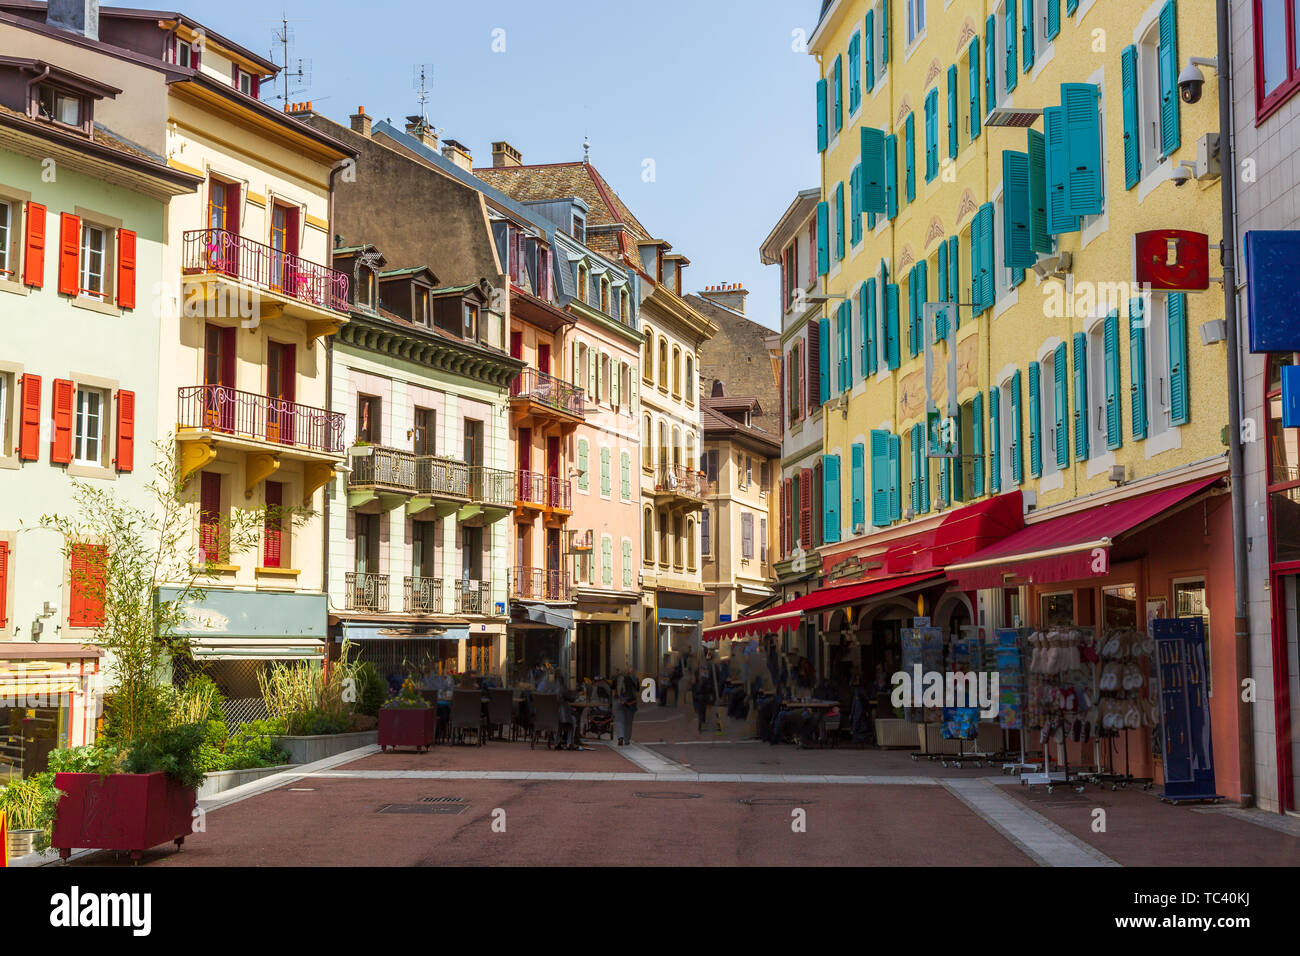 Old town buildings in Evian-les-Bains city in France Stock Photo